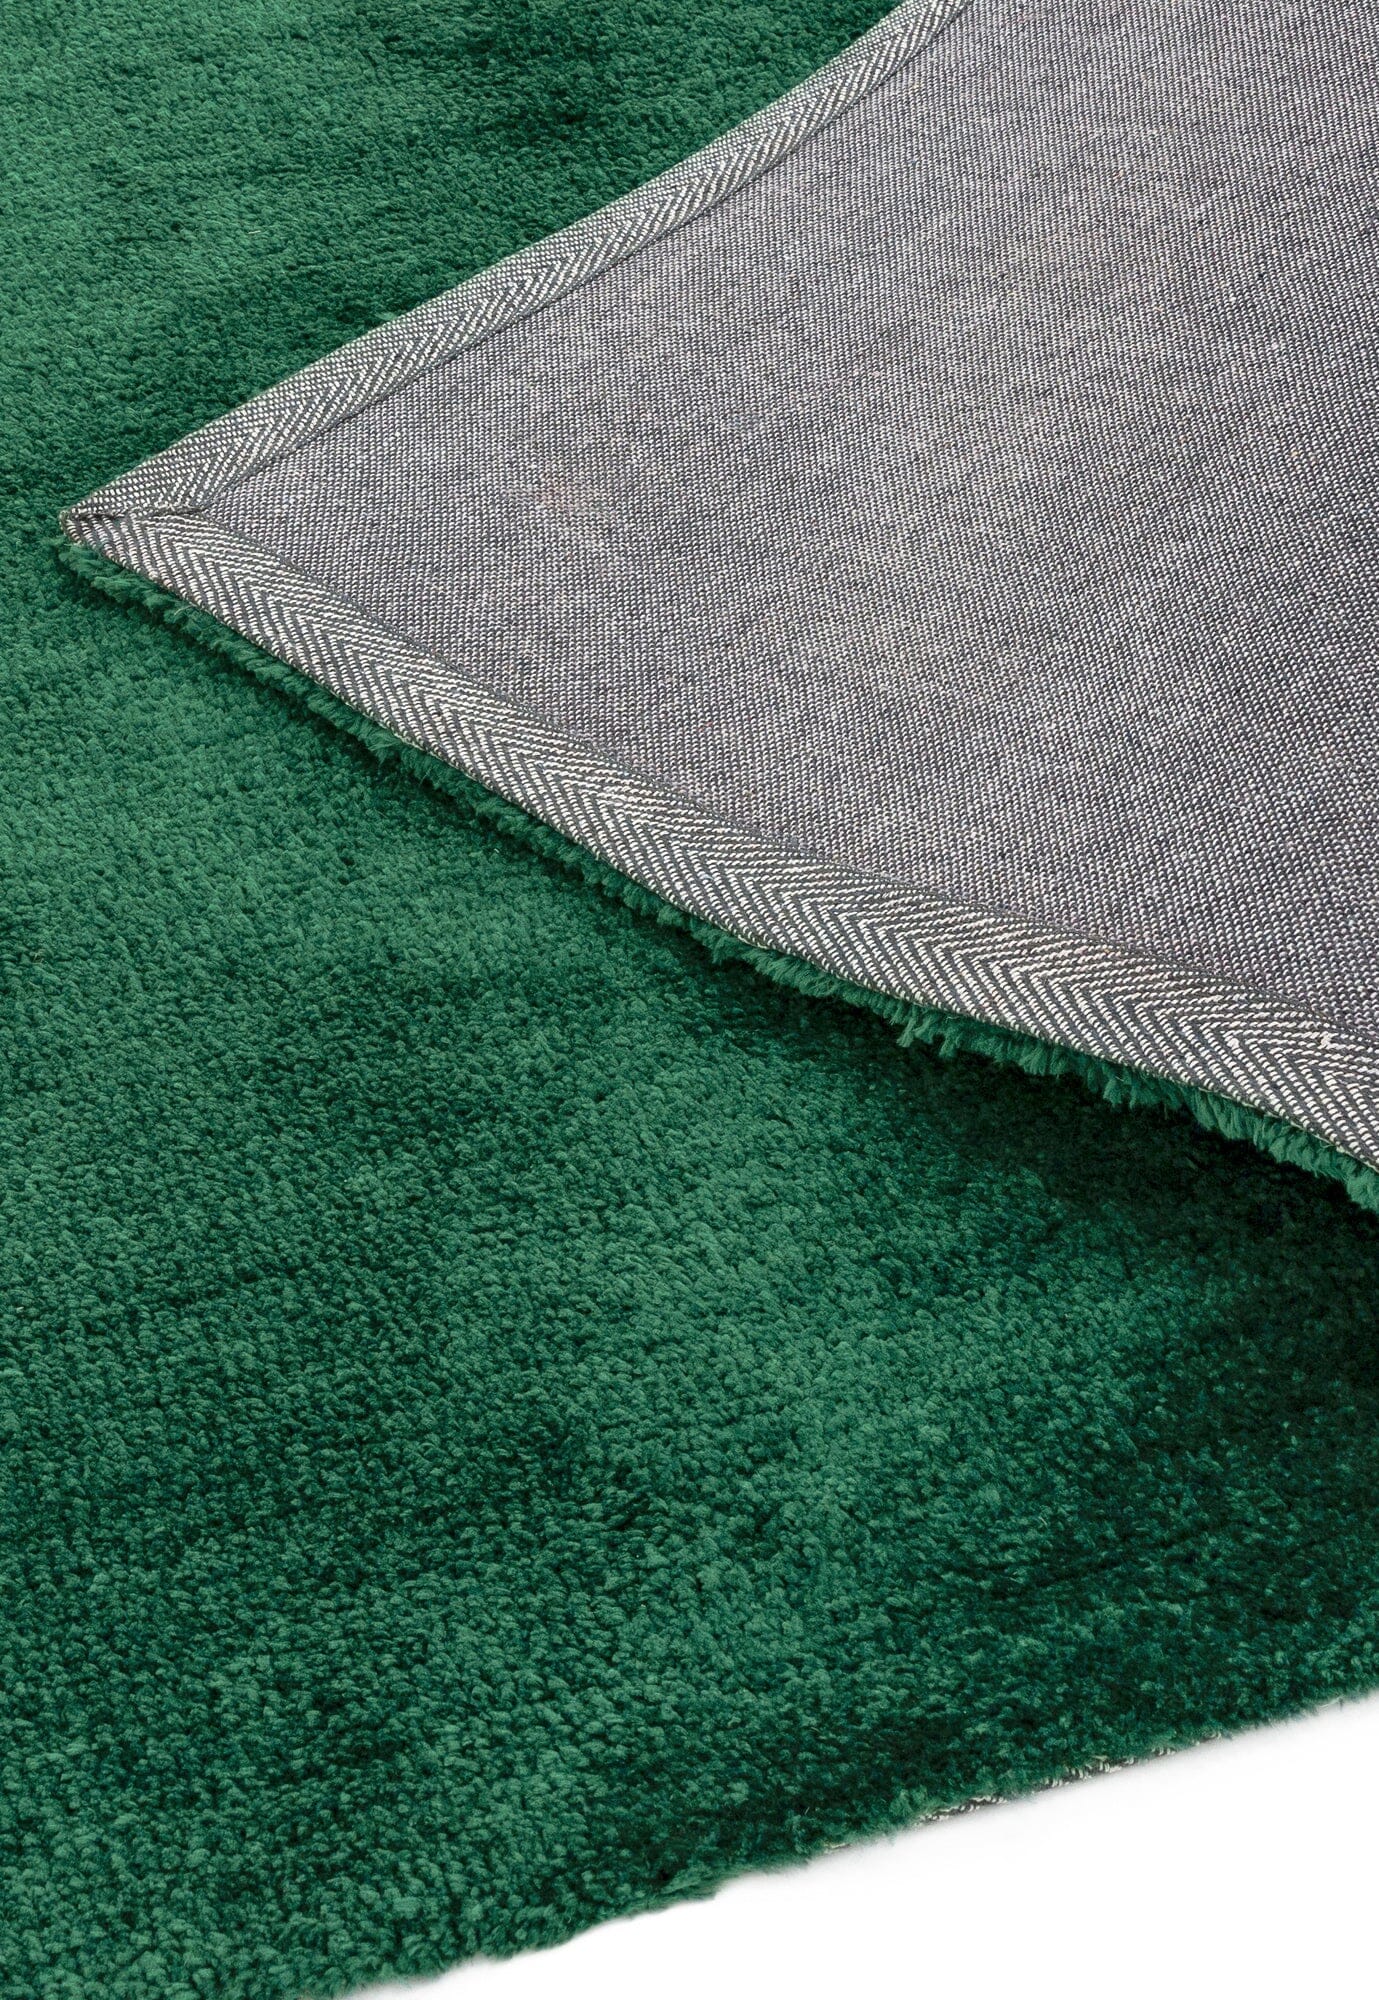 Asiatic Carpets Milo Table Tufted Rug Green - 200 x 290cm